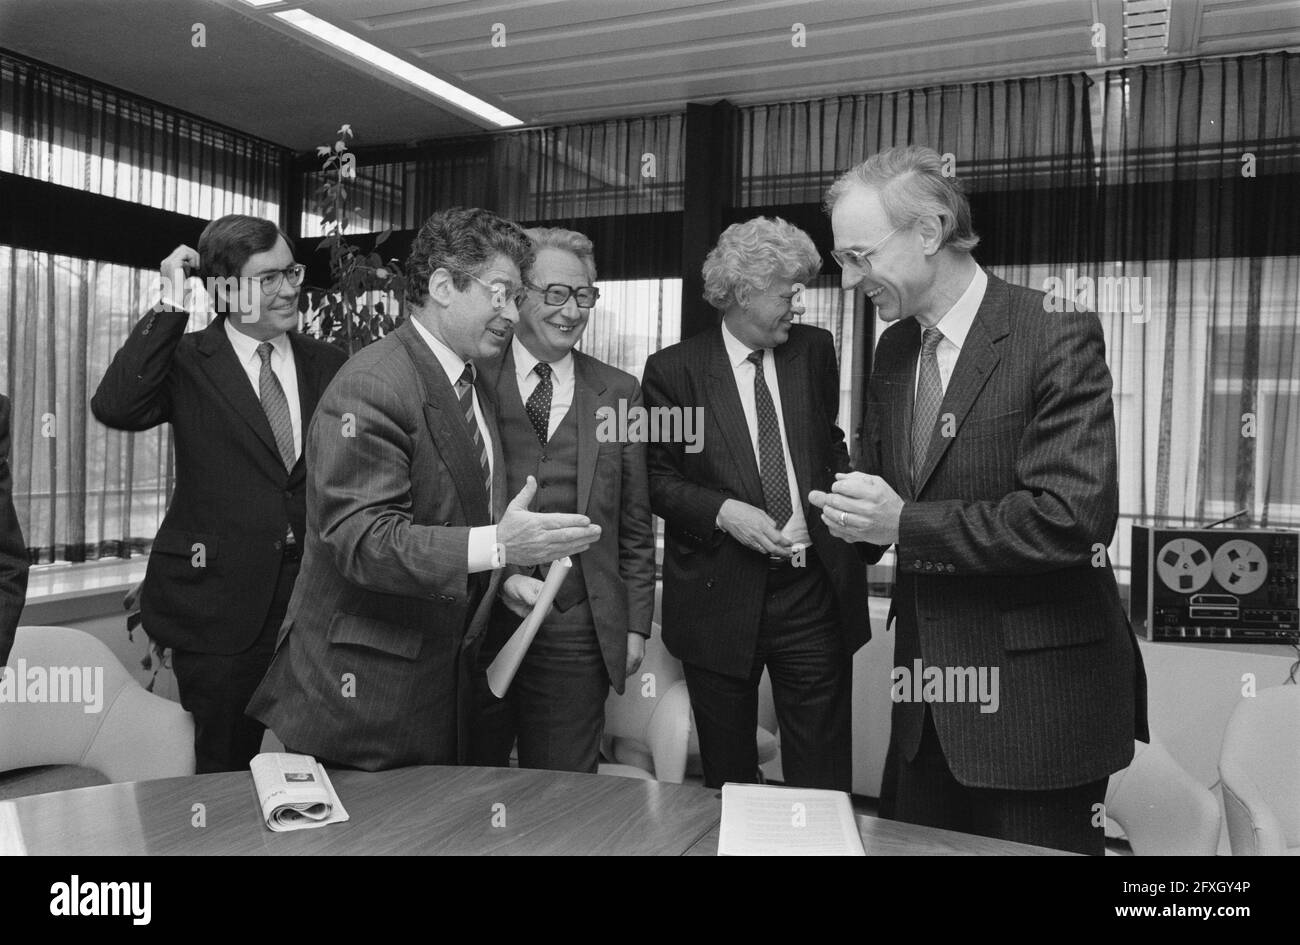 Vn left to right alderman Van Duyn, mayor Van Thijn, ABN top executive Hazelhoff, president of the Dutch Bank Duisenberg and finance minister Ruding, March 16, 1989, mayors, ministers, presentations, presidents, reports, aldermen, The Netherlands, 20th century press agency photo, news to remember, documentary, historic photography 1945-1990, visual stories, human history of the Twentieth Century, capturing moments in time Stock Photo